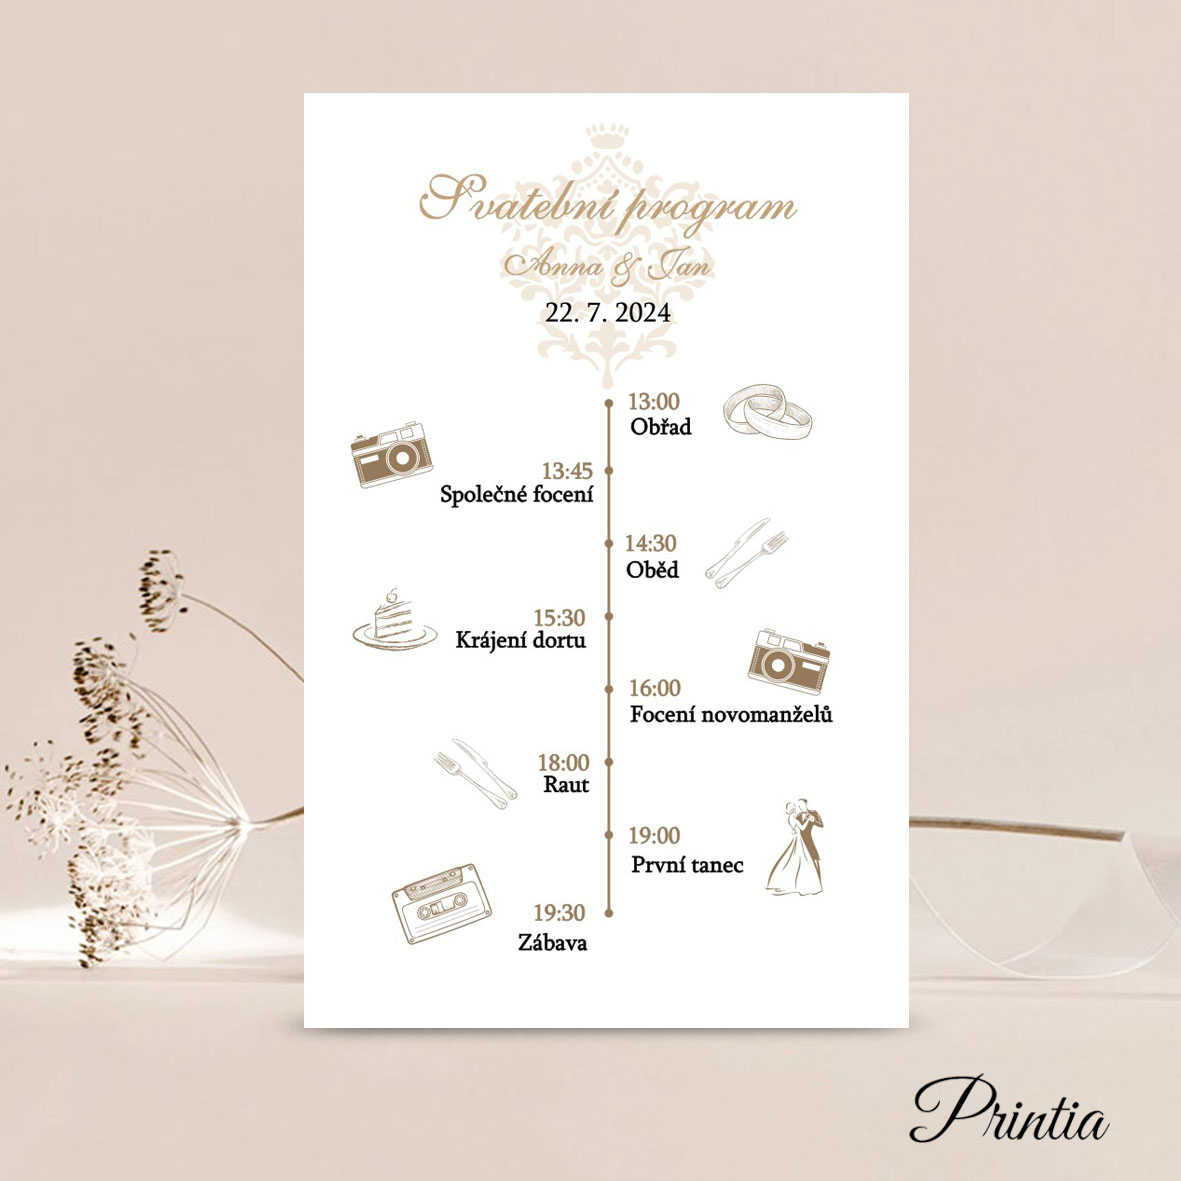 Wedding timeline with ornament